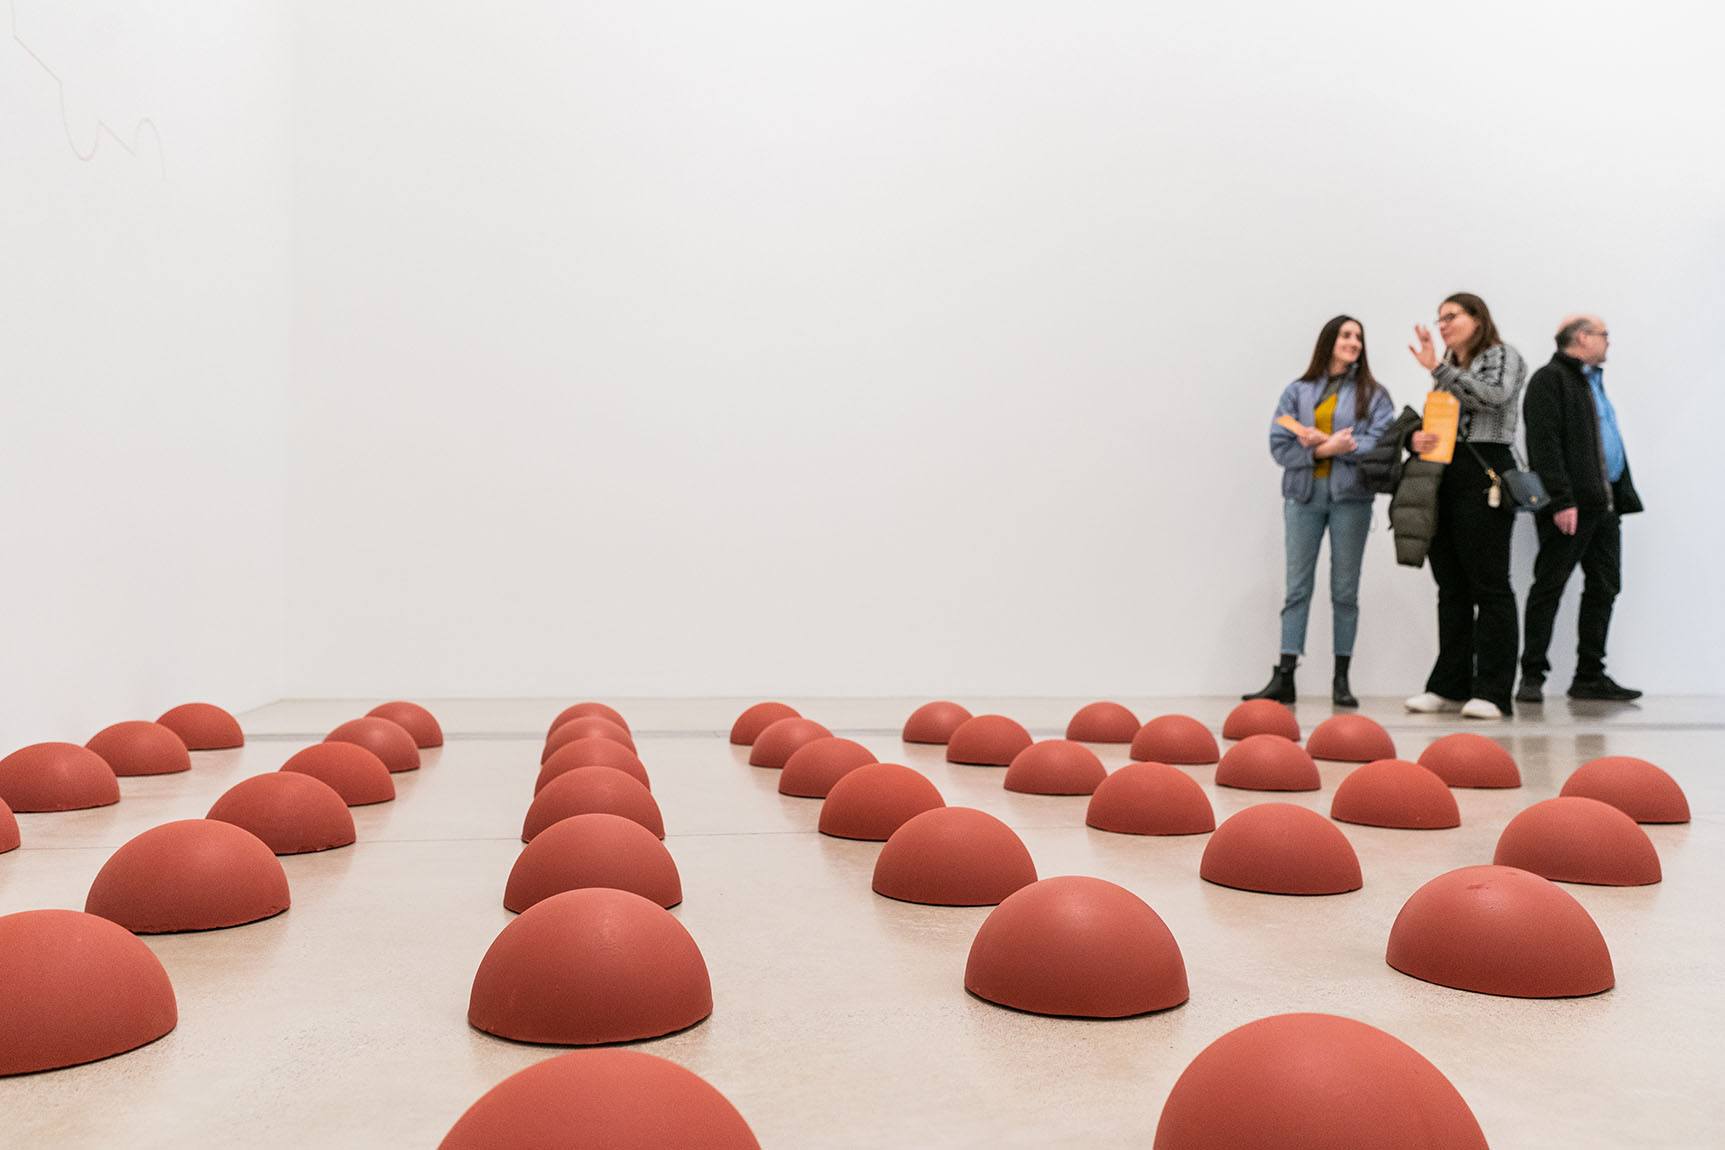 People standing with artwork, several small red mounds lined up in a grid on the floor